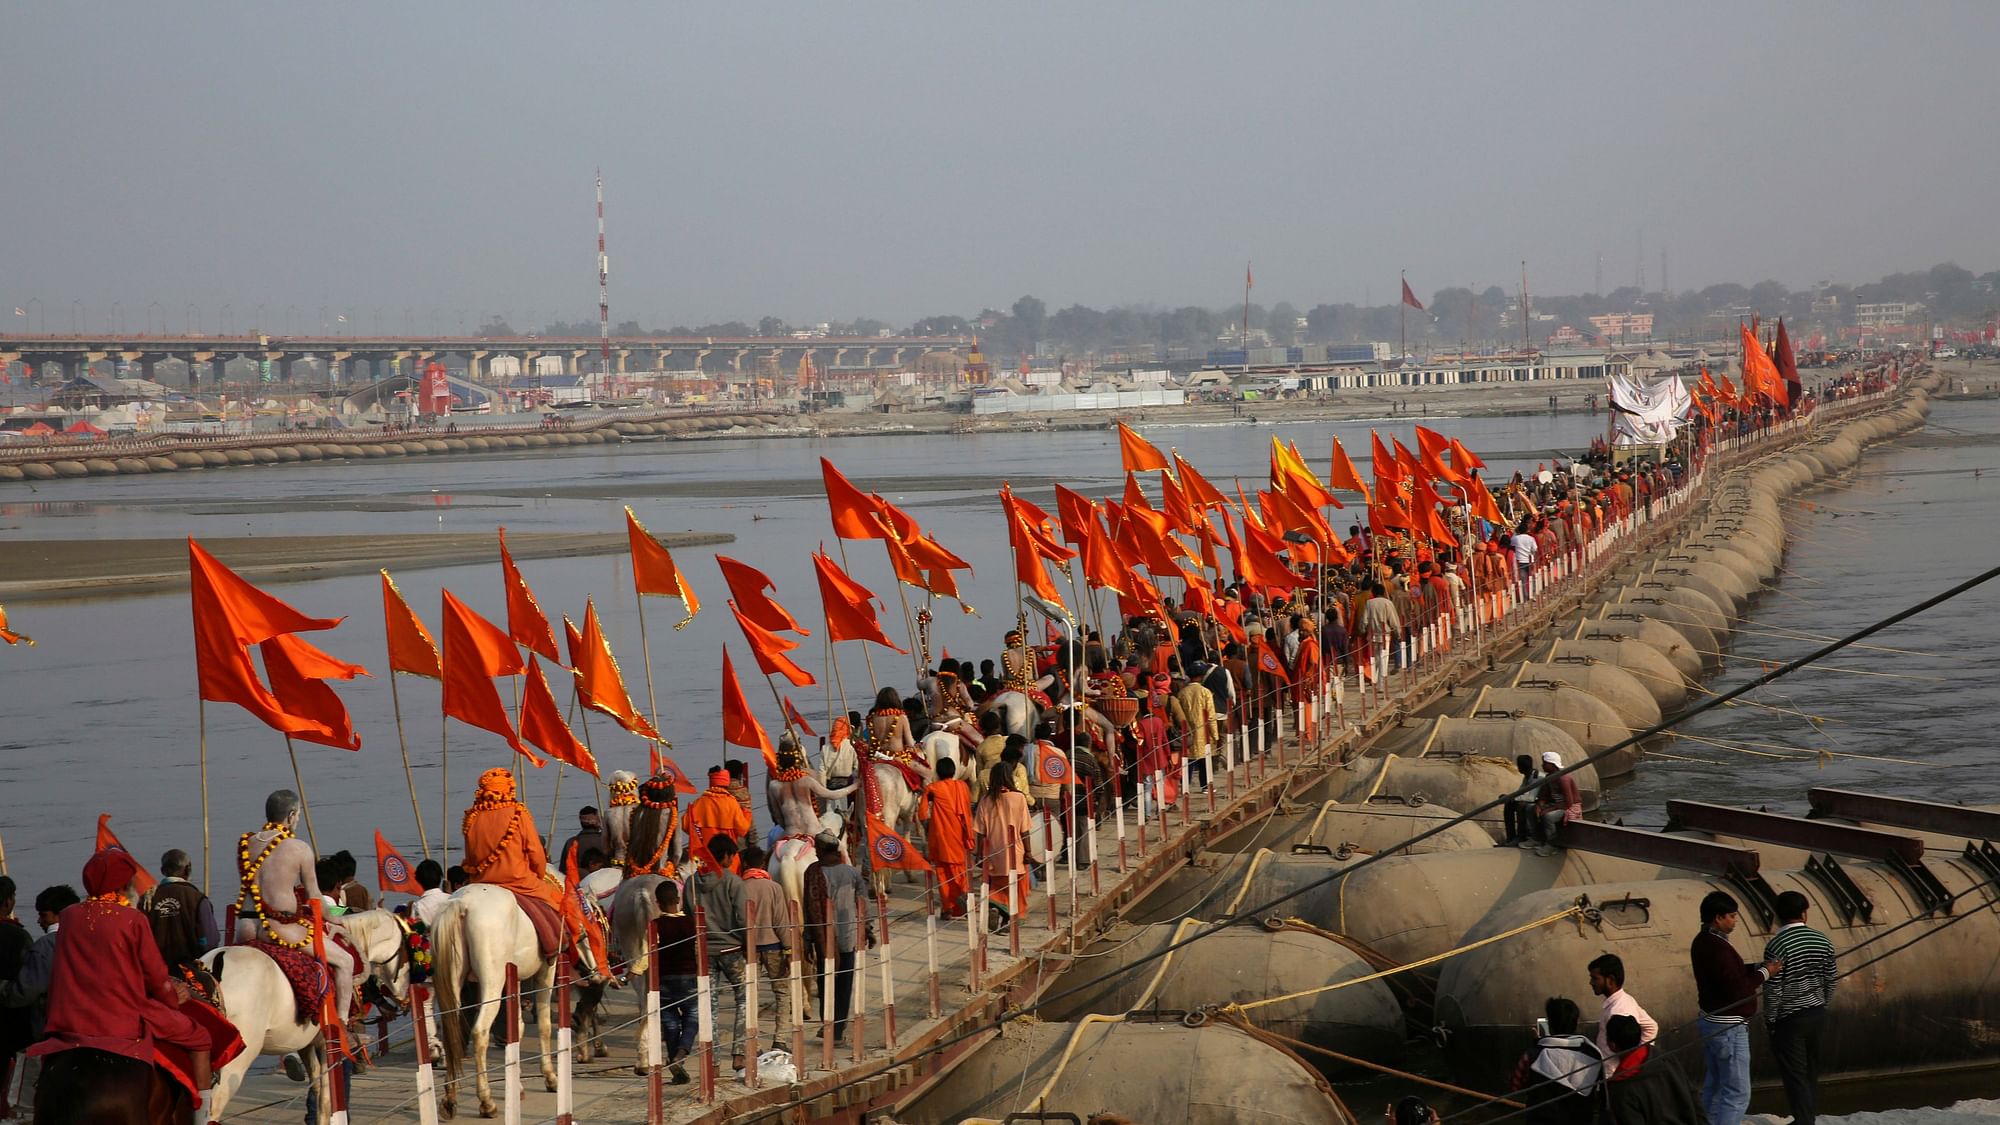 Naga Sadhus, or Hindu holy men, participate in a procession towards the Sangam, the confluence of rivers Ganges and Yamuna, ahead of the Kumbh Mela in Allahabad.